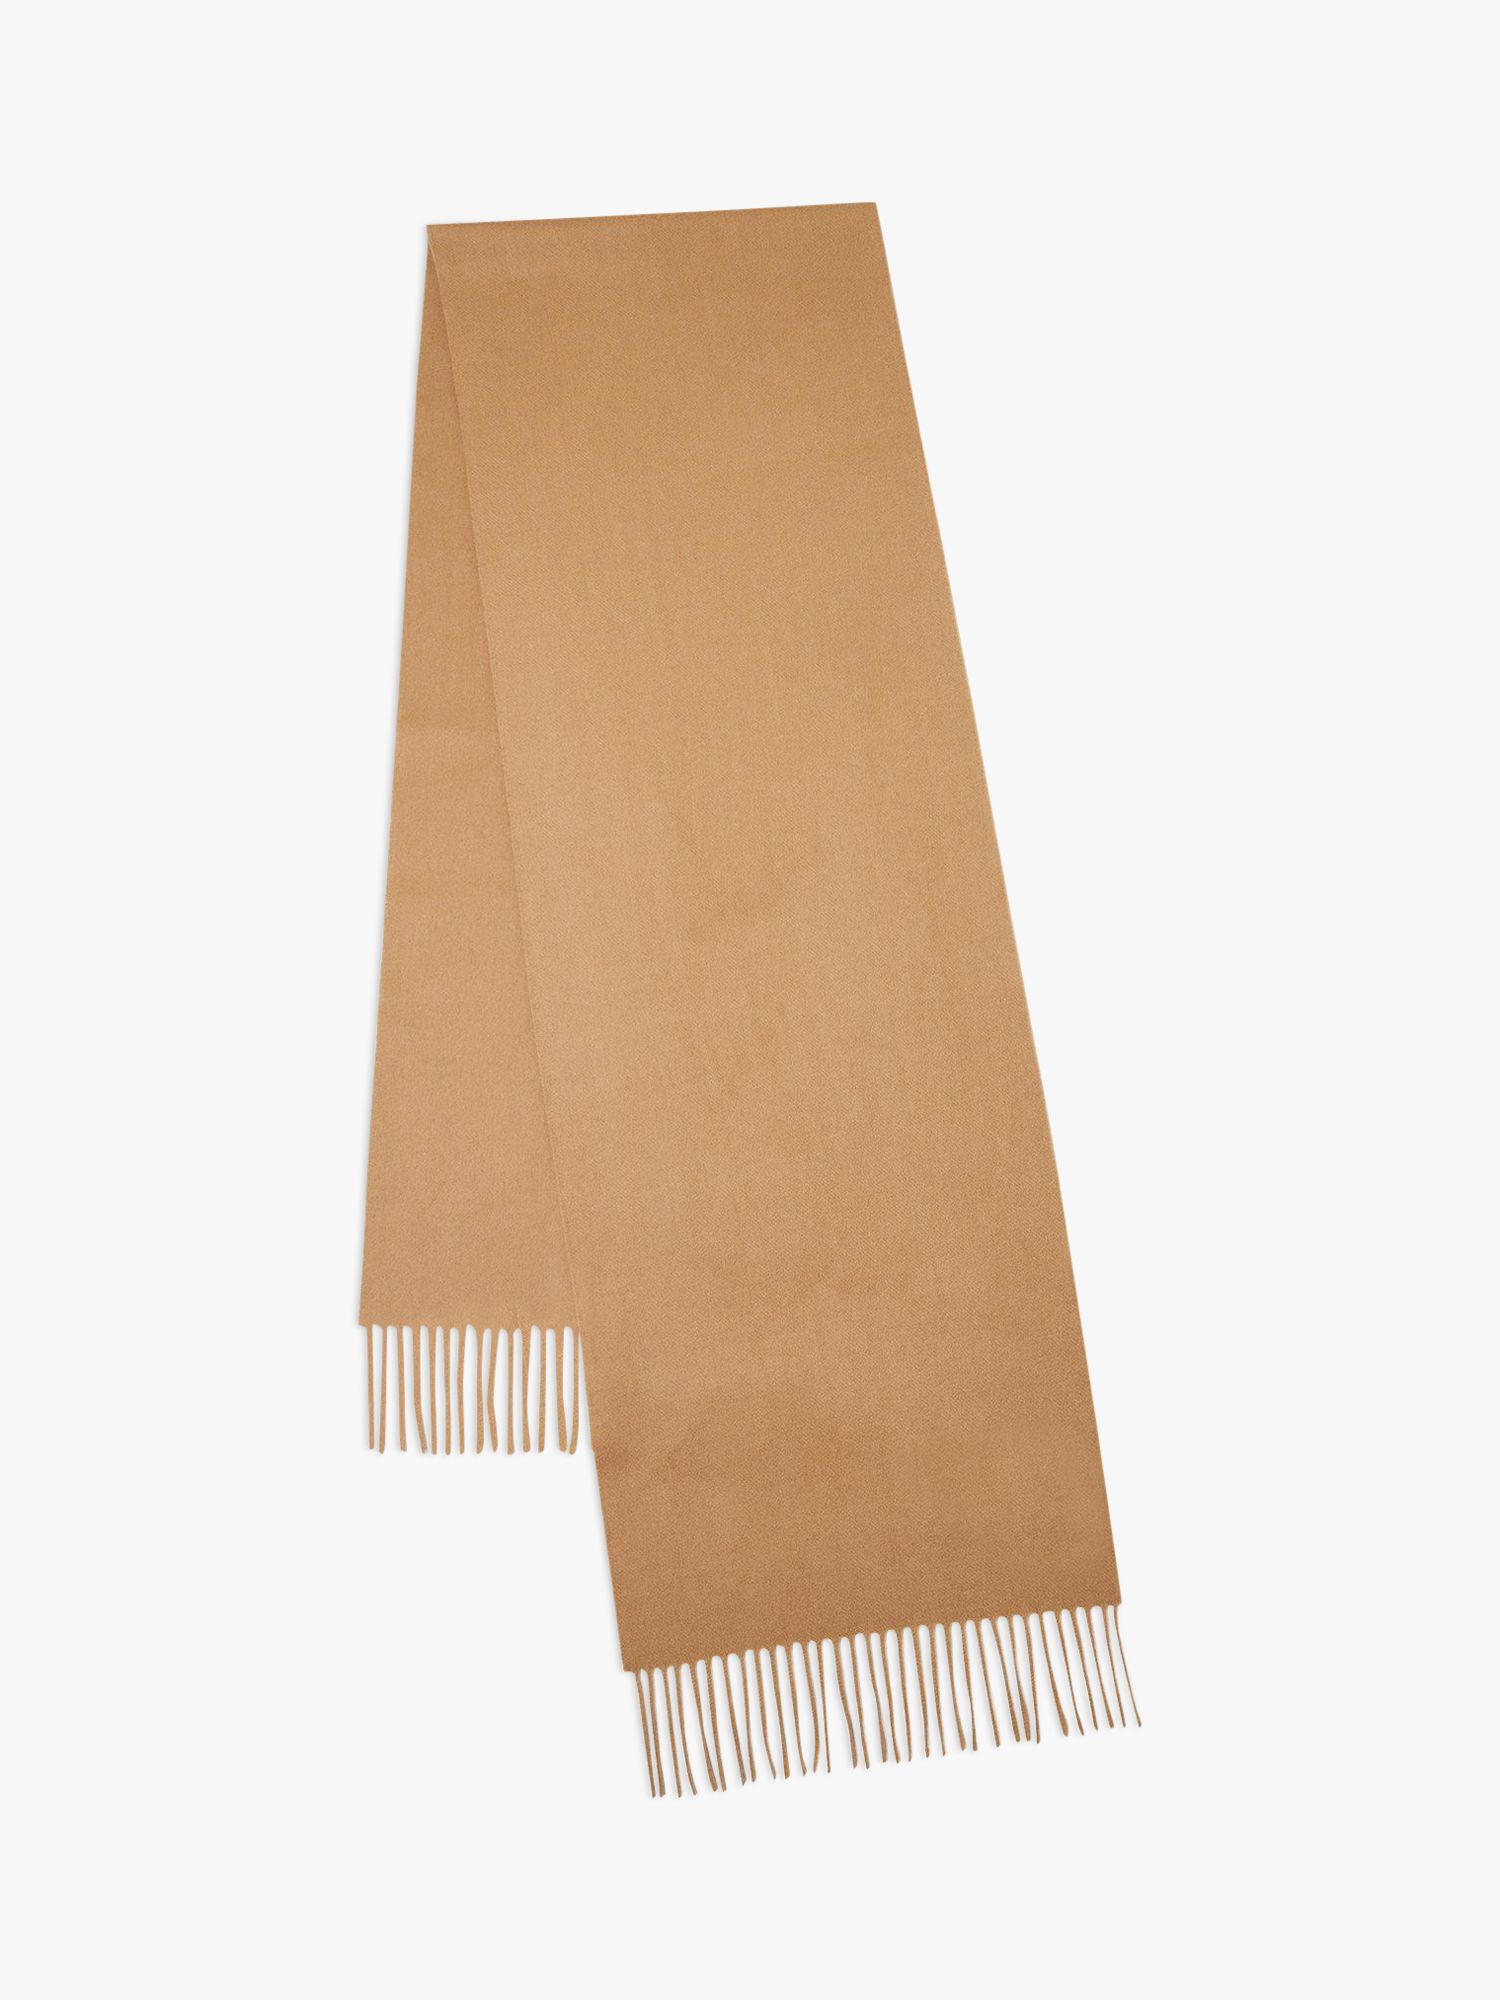 Buy Mulberry Small Solid Lambswool Scarf Online at johnlewis.com